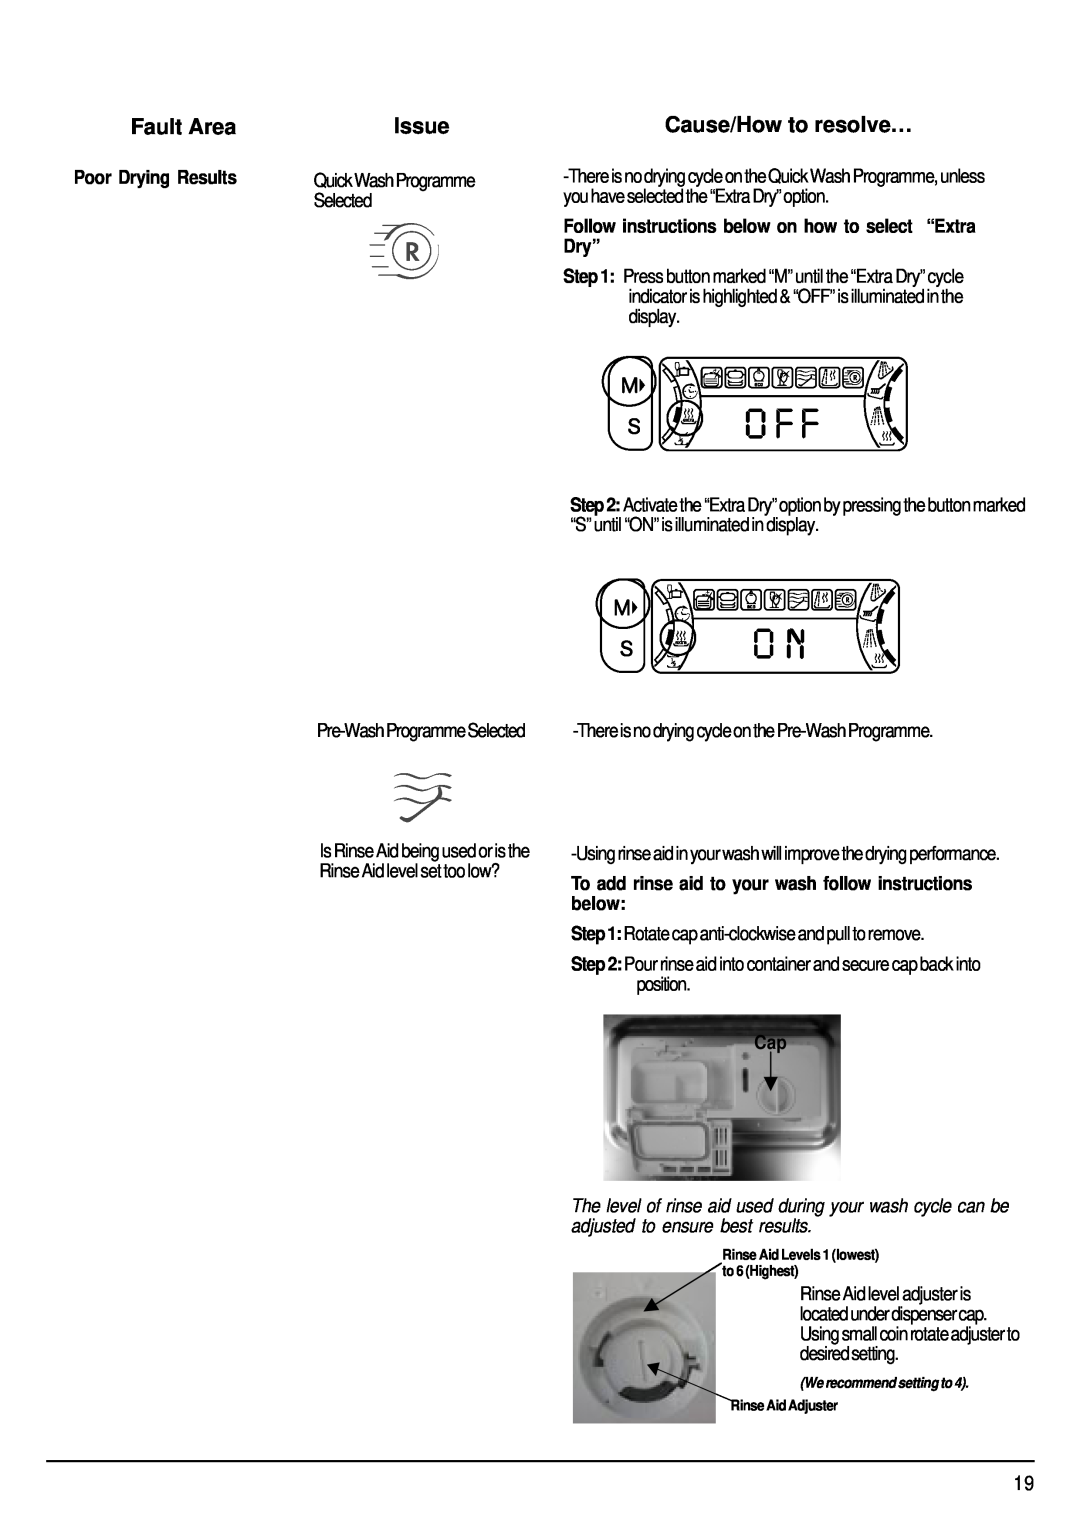 Hotpoint ULTIMA manual Fault Area, Issue, Cause/How to resolve…, Poor Drying Results 